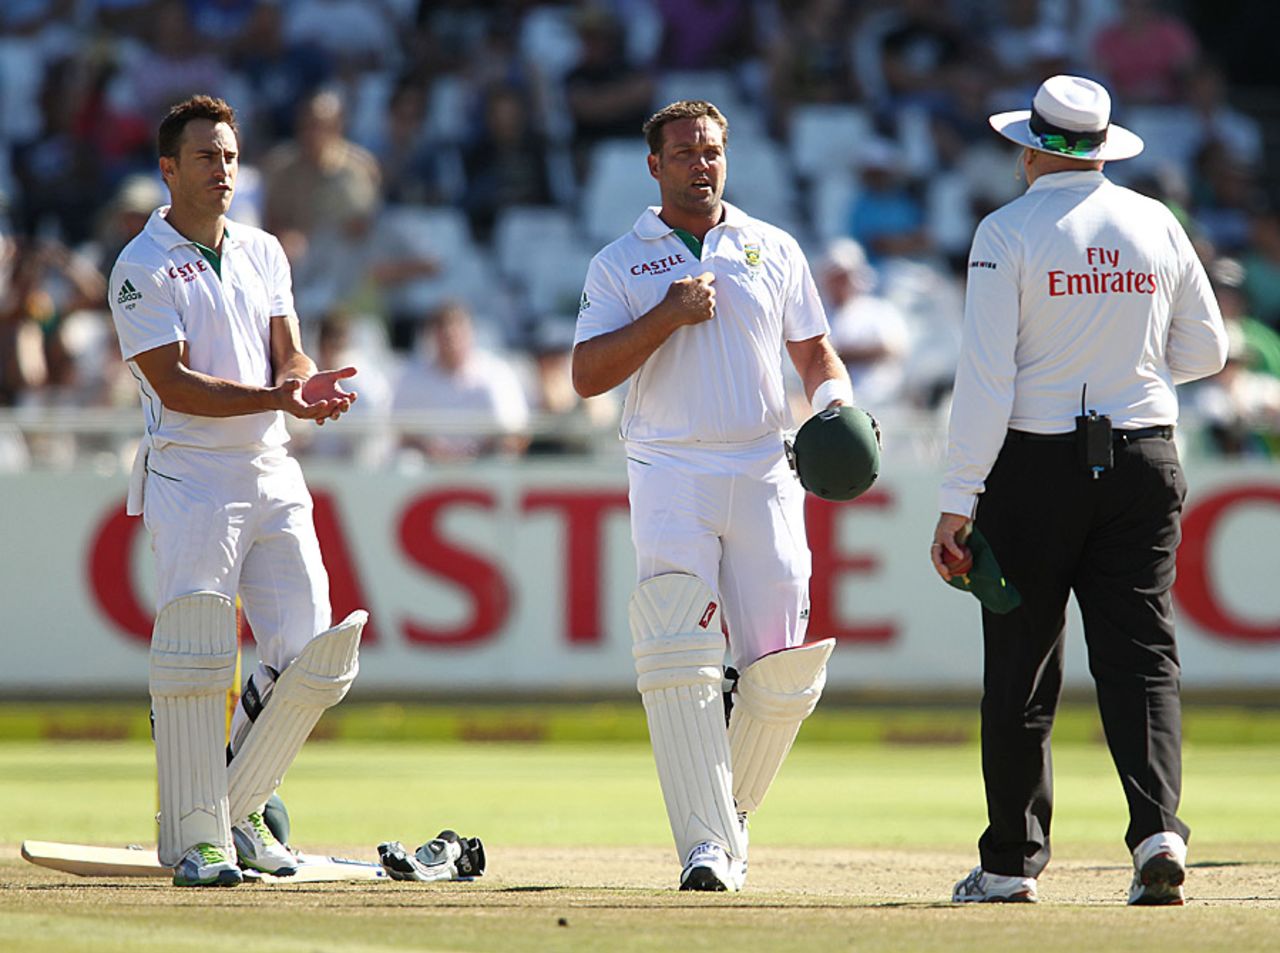 Jacques Kallis has a word with the umpire about his dismissal, South Africa v Pakistan, 2nd Test, Cape Town, 2nd day, February 15, 2013